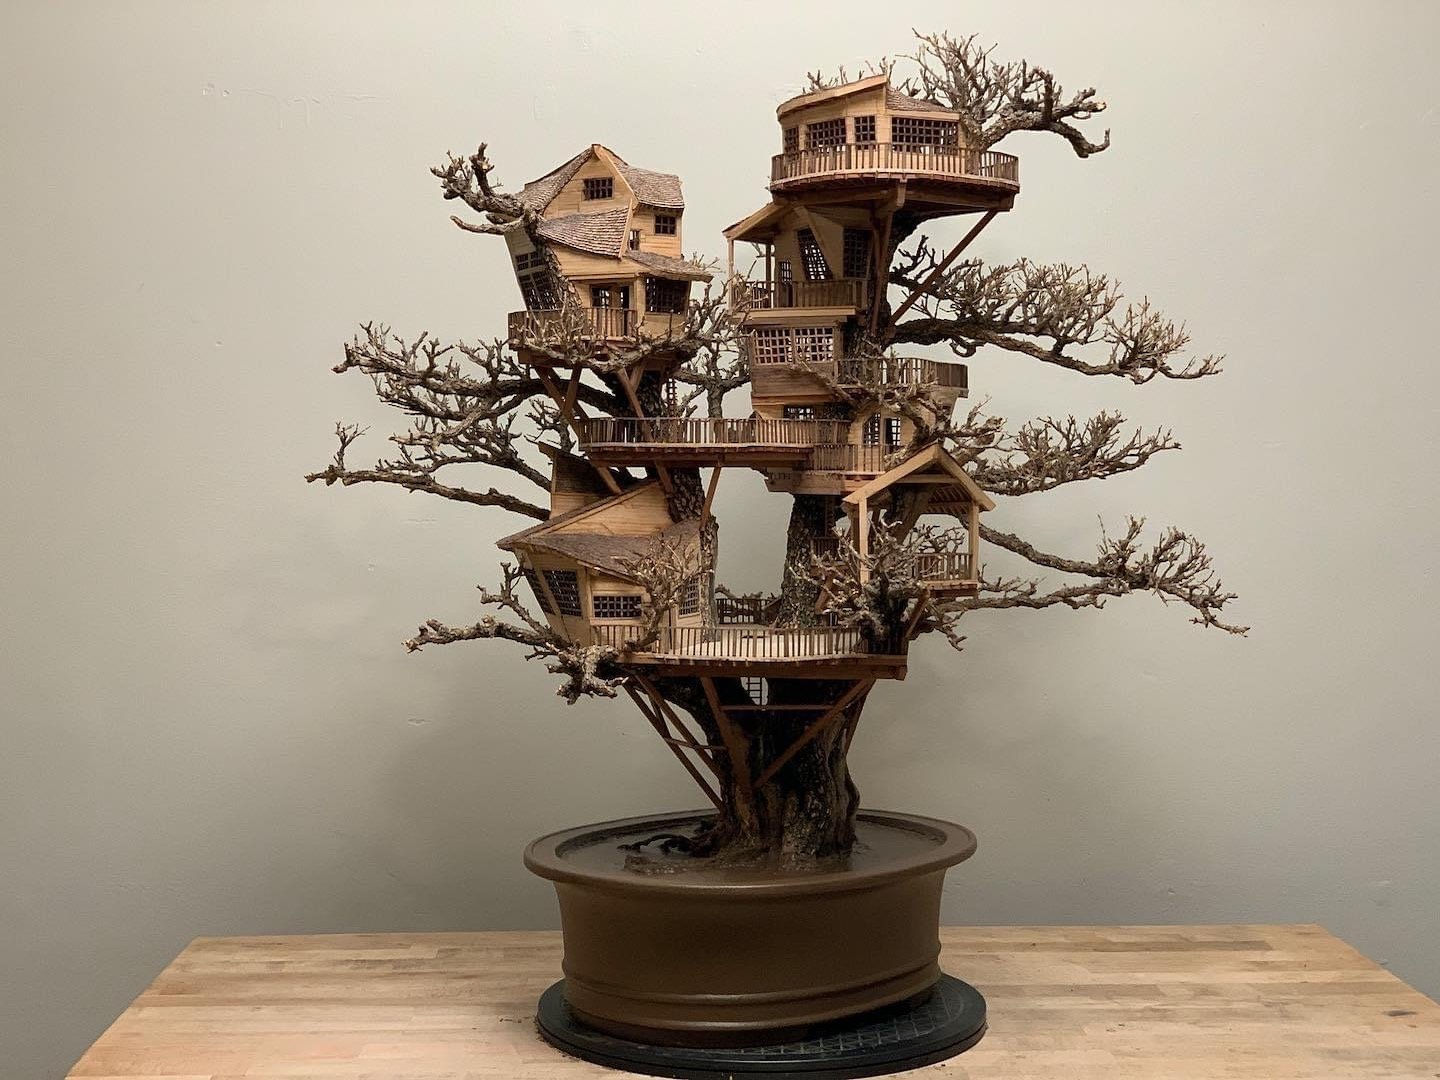 Dave Creek’s Traveling Treehouses